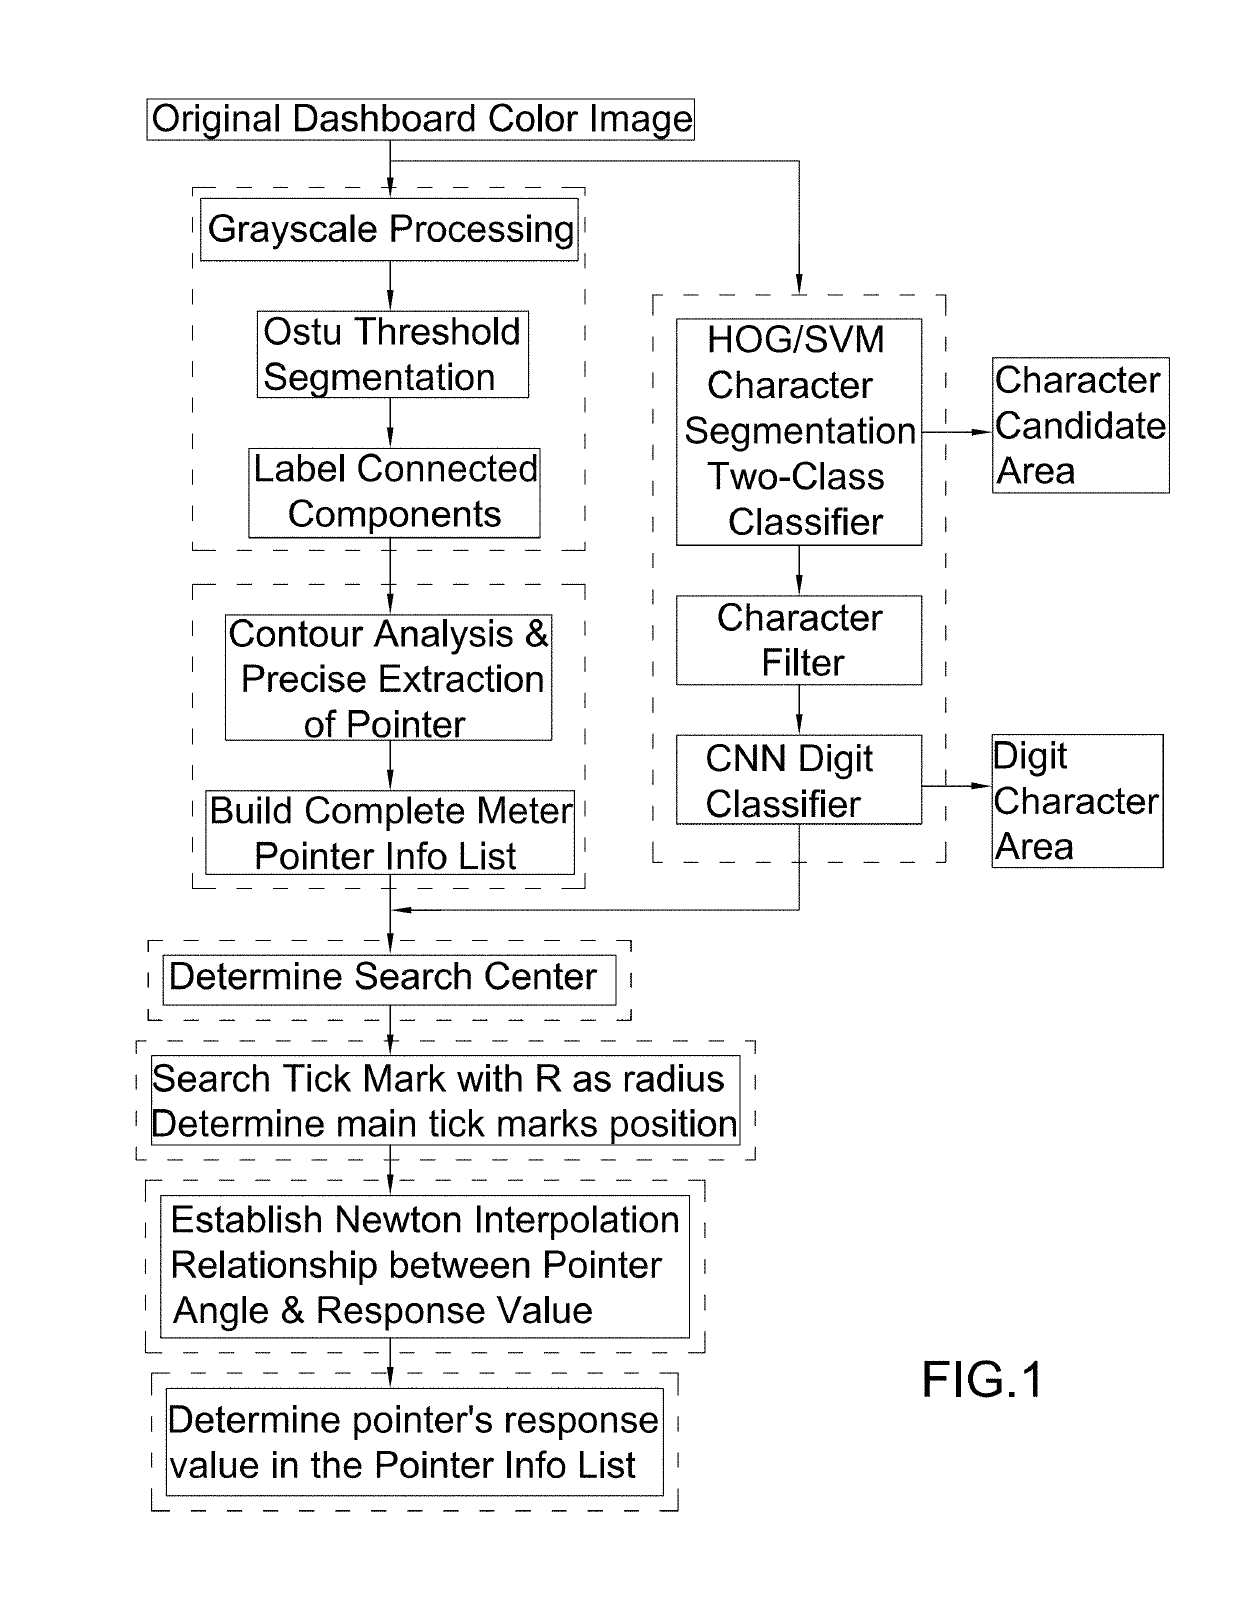 Adaptive Auto Meter Detection Method based on Character Segmentation and Cascade Classifier